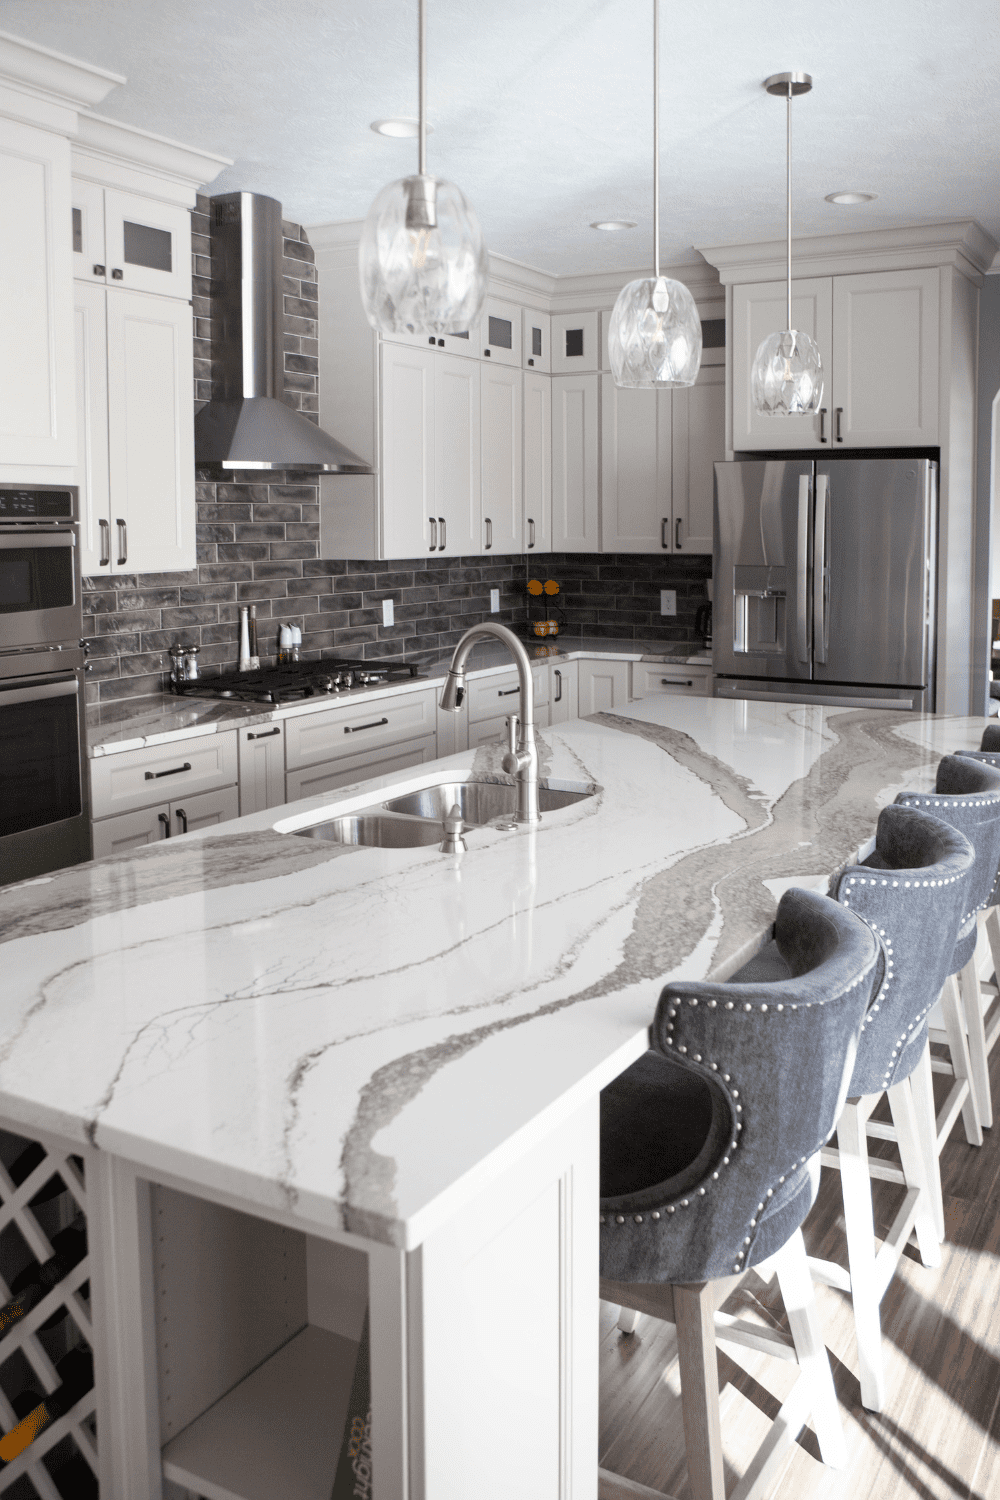 Nicholas Design Build | A kitchen with marble counter tops and bar stools.